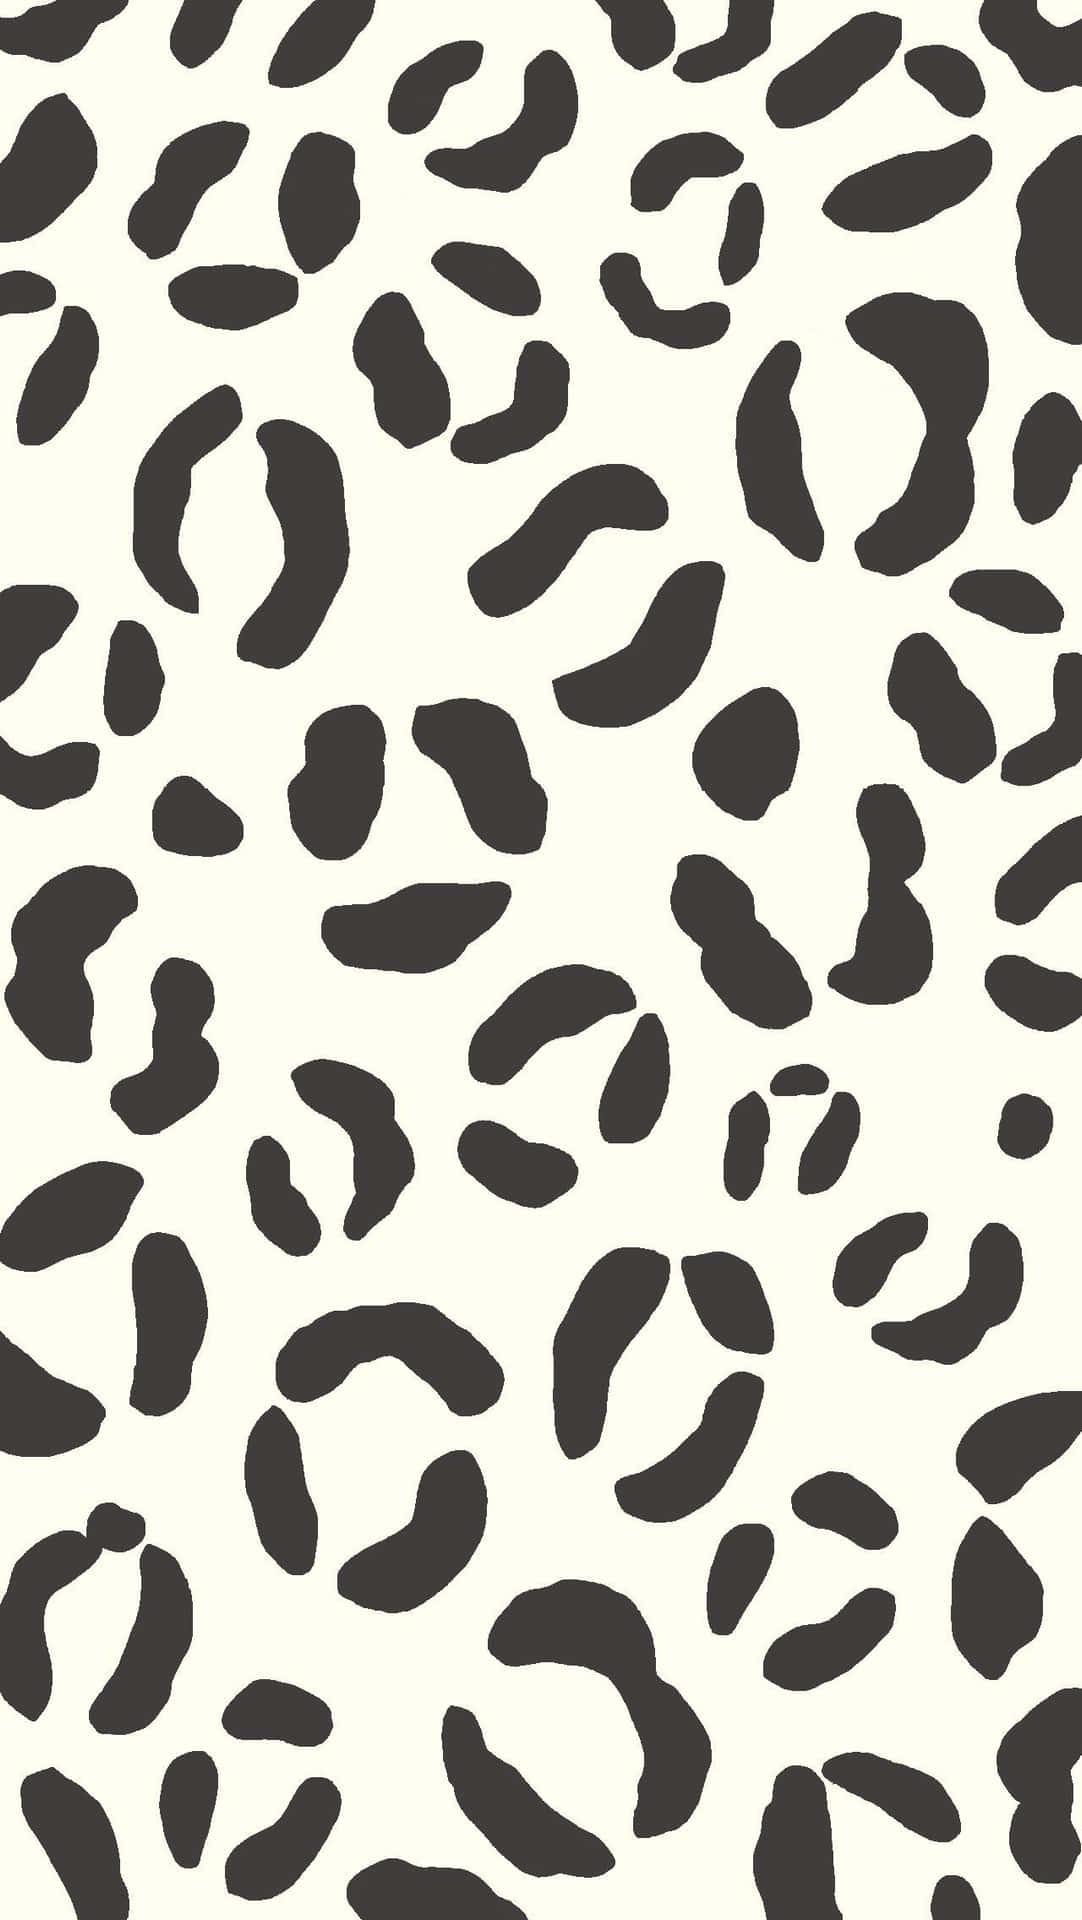 100+] White Leopard Print Wallpapers